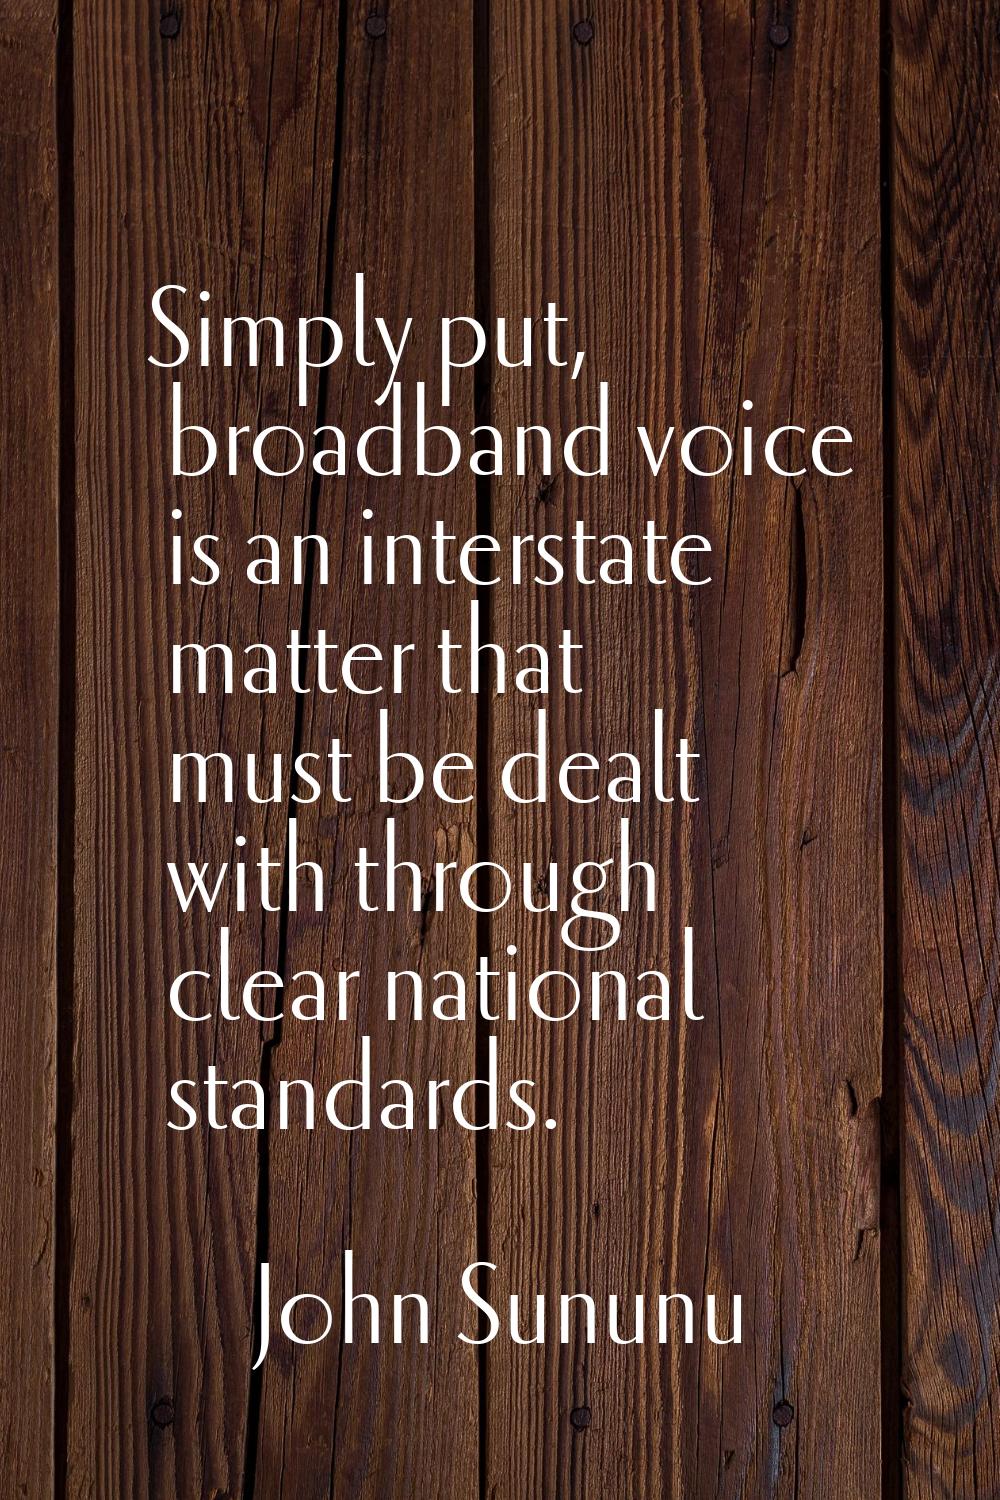 Simply put, broadband voice is an interstate matter that must be dealt with through clear national 